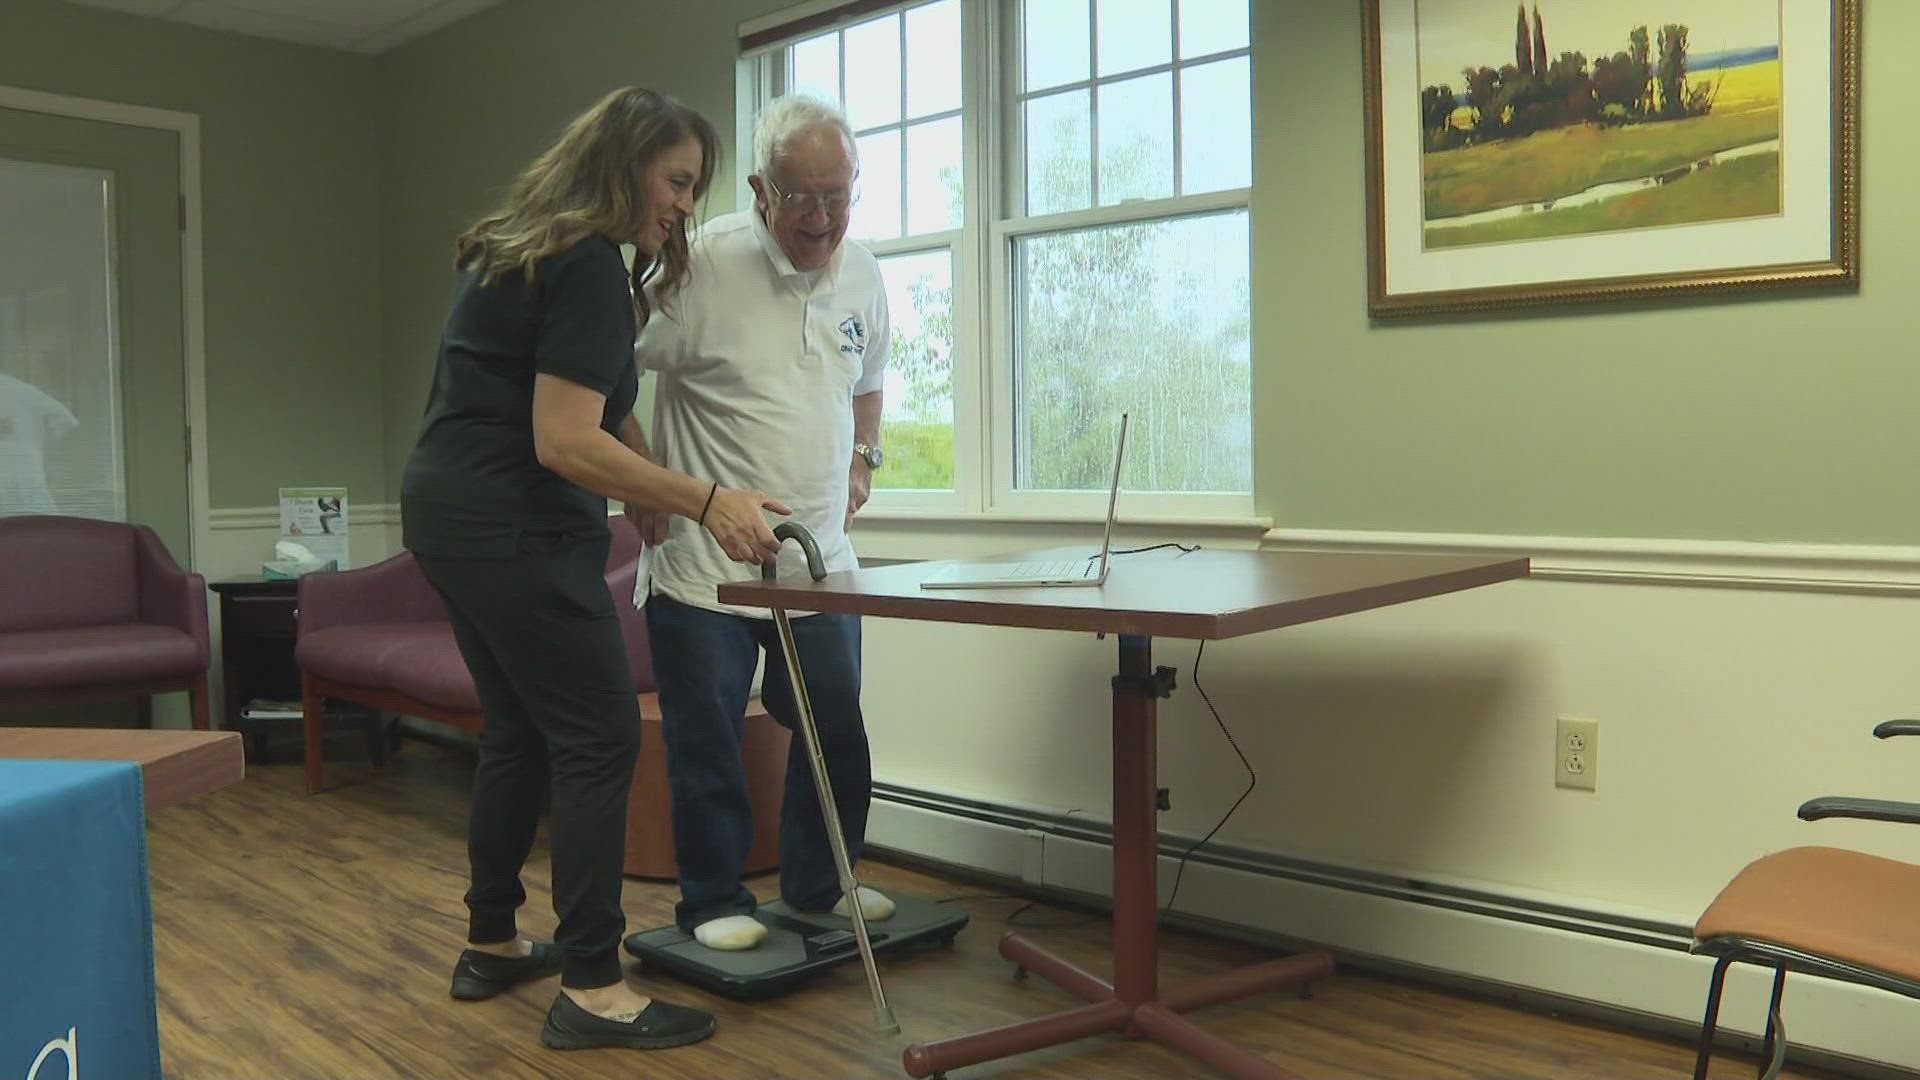 The free drop-in event was held to recognize September as Falls Prevention Awareness Month.